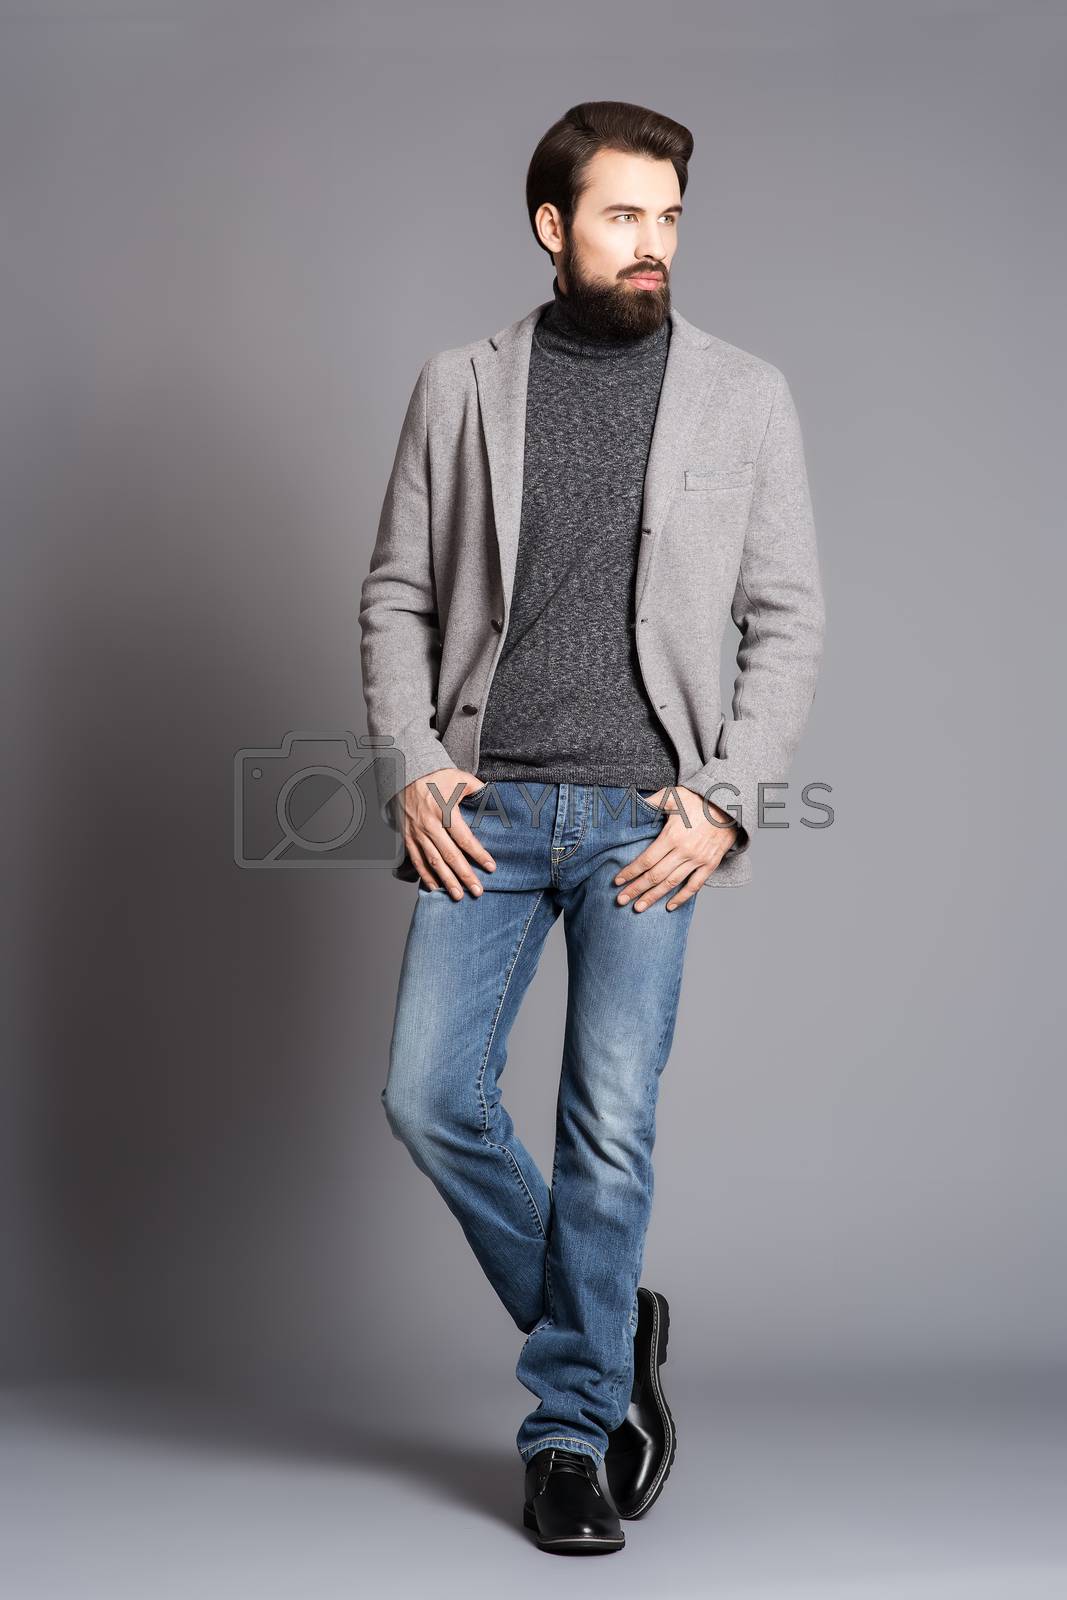 Royalty free image of a young man with a beard, wearing a jacket and jeans standing in by timofeev